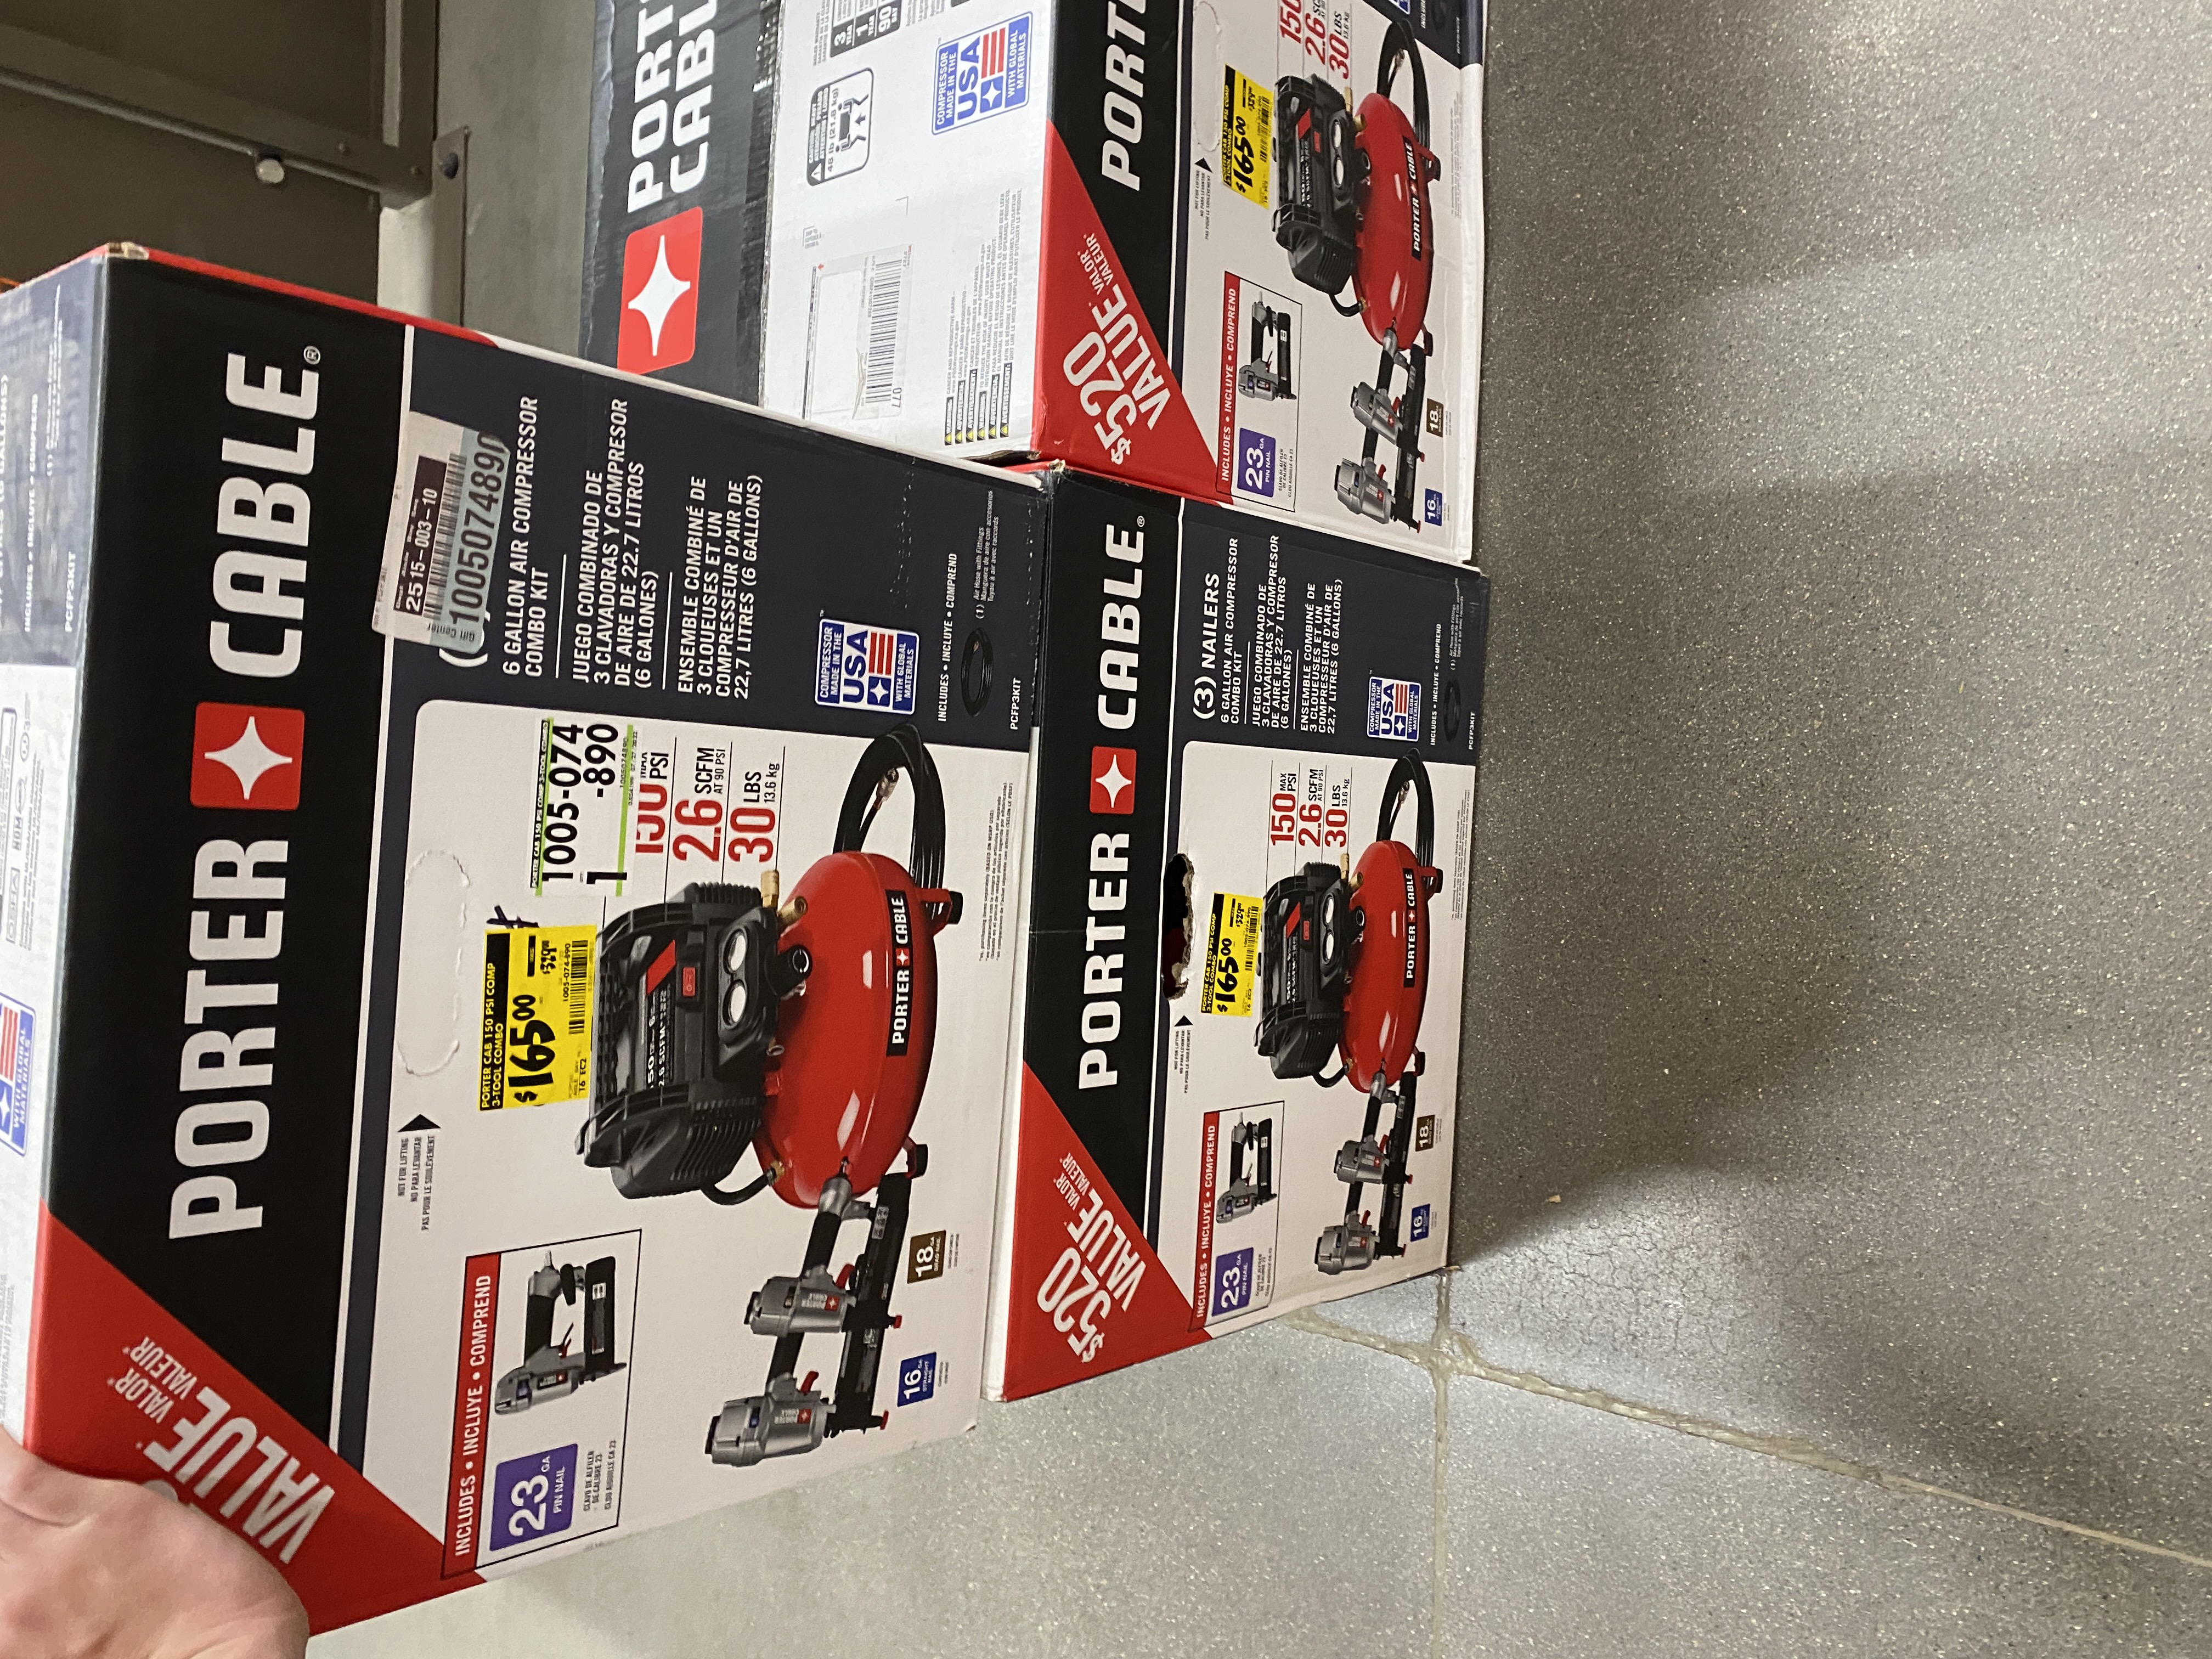 Porter-Cable 6 Gal. Portable Electric Air Compressor with 16-Gauge, 18-Gauge and 23-Gauge Nailer Combo Kit (3-Tool) PCFP3KIT - $165